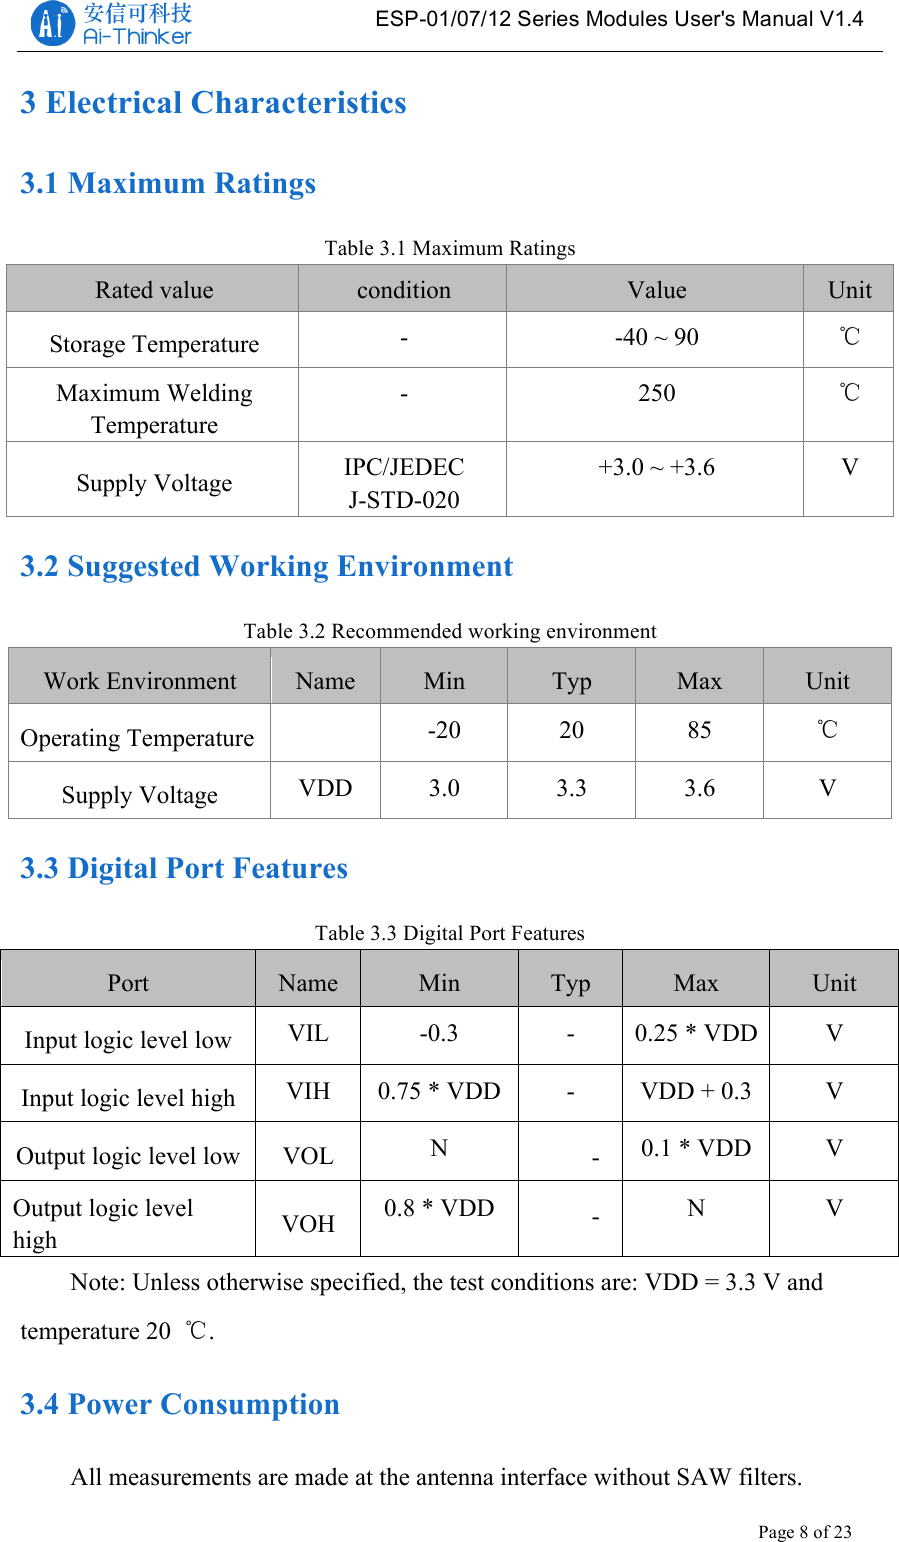   ESP-01/07/12 Series Modules User&apos;s Manual V1.4 Copyright © 2017 Shenzhen Ai-Thinker Technology Co., Ltd All Rights Reserved Page 8 of 23   3 Electrical Characteristics 3.1 Maximum Ratings Table 3.1 Maximum Ratings Rated value condition Value Unit Storage Temperature - -40 ~ 90 ℃ Maximum Welding Temperature - 250 ℃ Supply Voltage IPC/JEDEC J-STD-020 +3.0 ~ +3.6 V 3.2 Suggested Working Environment Table 3.2 Recommended working environment Work Environment Name Min Typ Max Unit Operating Temperature  -20 20 85 ℃ Supply Voltage VDD 3.0 3.3 3.6 V 3.3 Digital Port Features Table 3.3 Digital Port Features Port Name Min Typ Max Unit Input logic level low VIL -0.3 - 0.25 * VDD V Input logic level high VIH 0.75 * VDD - VDD + 0.3 V Output logic level low VOL N - 0.1 * VDD V Output logic level high VOH 0.8 * VDD - N V Note: Unless otherwise specified, the test conditions are: VDD = 3.3 V and temperature 20  ℃. 3.4 Power Consumption All measurements are made at the antenna interface without SAW filters. 